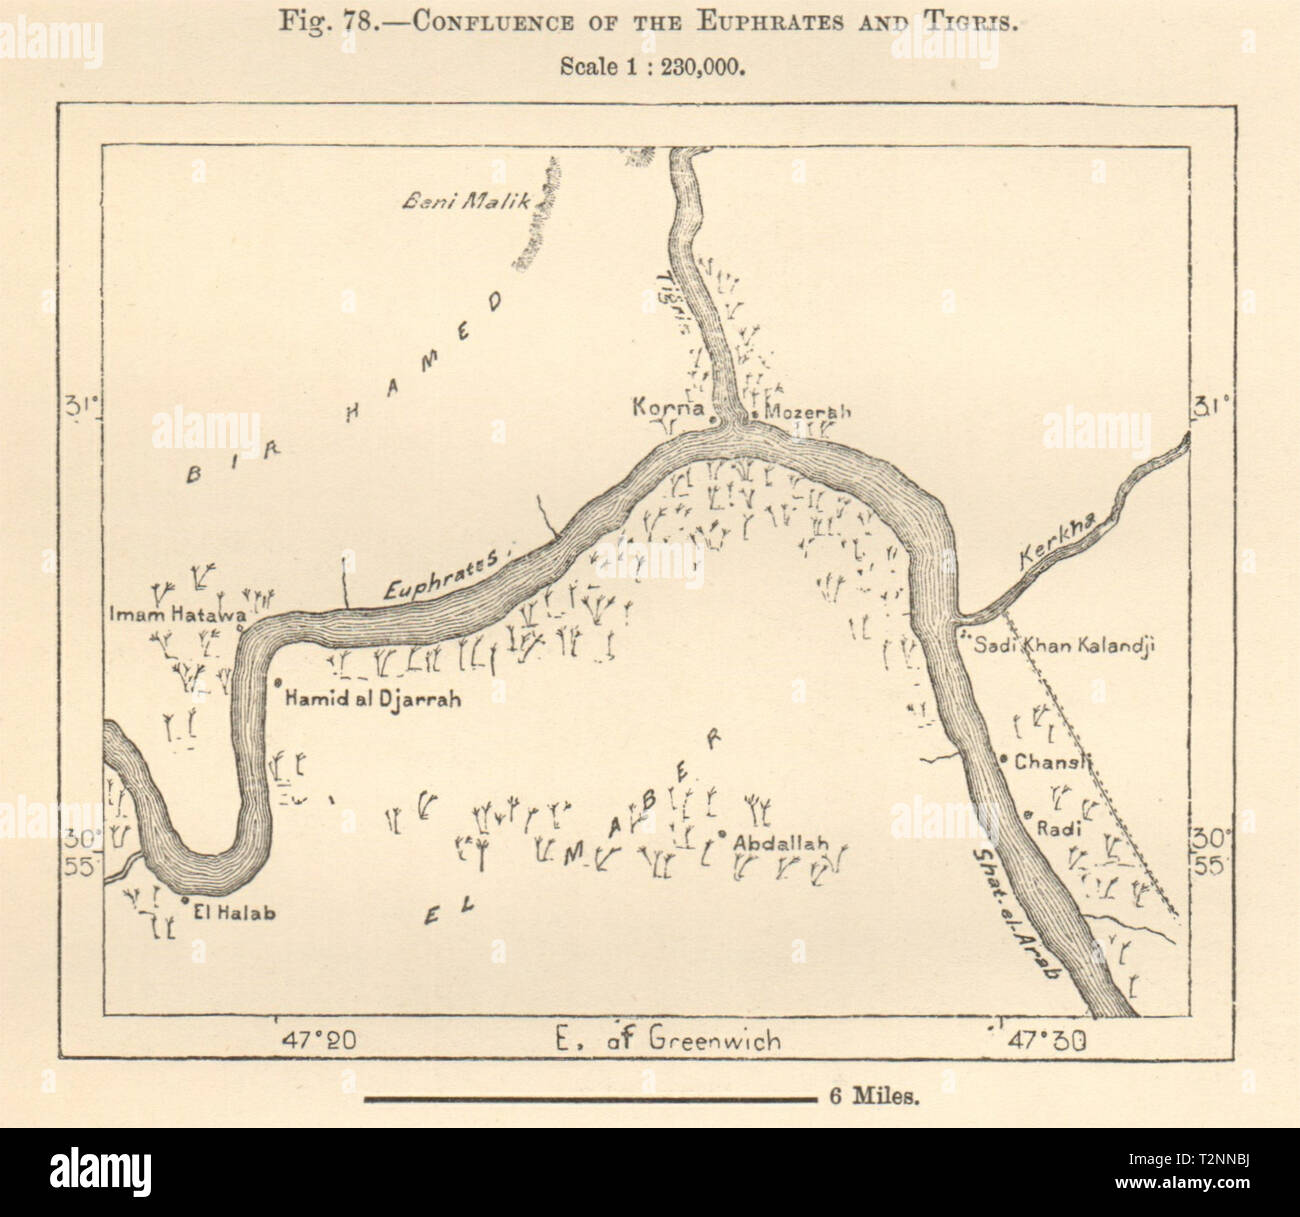 Confluence of the Euphrates and Tigris. Al Qurnah. Iraq. Sketch map 1885 Stock Photo